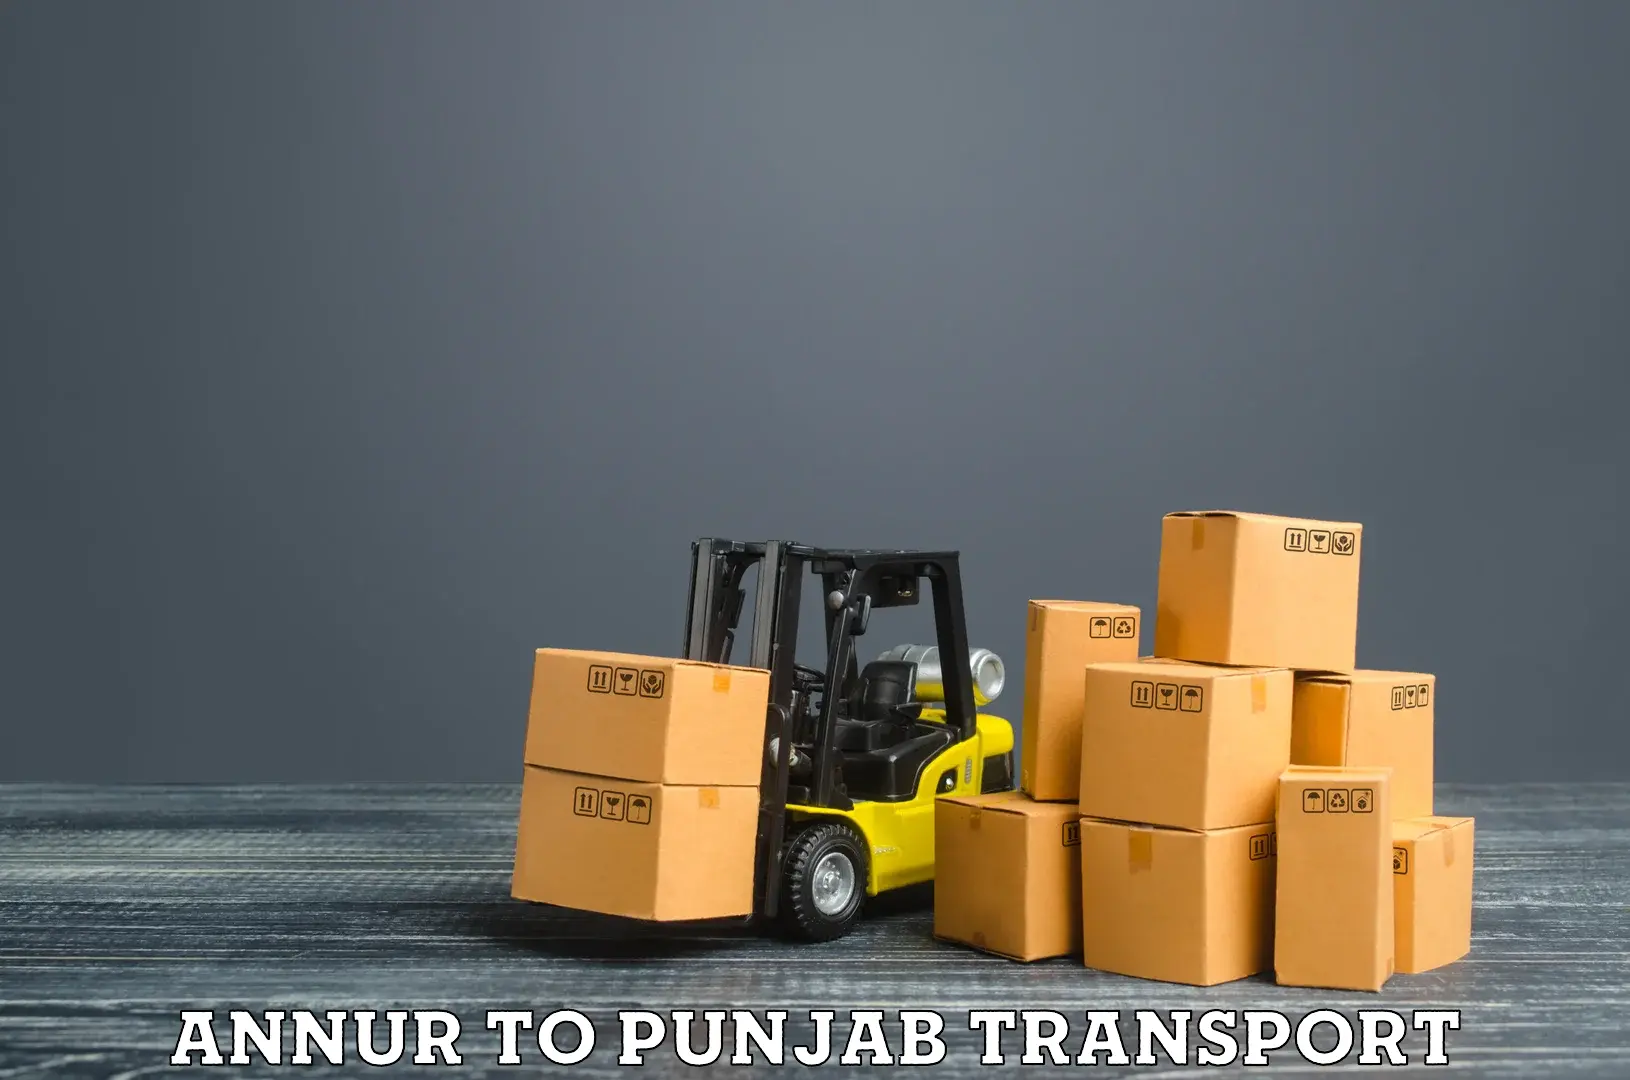 Express transport services Annur to Amritsar